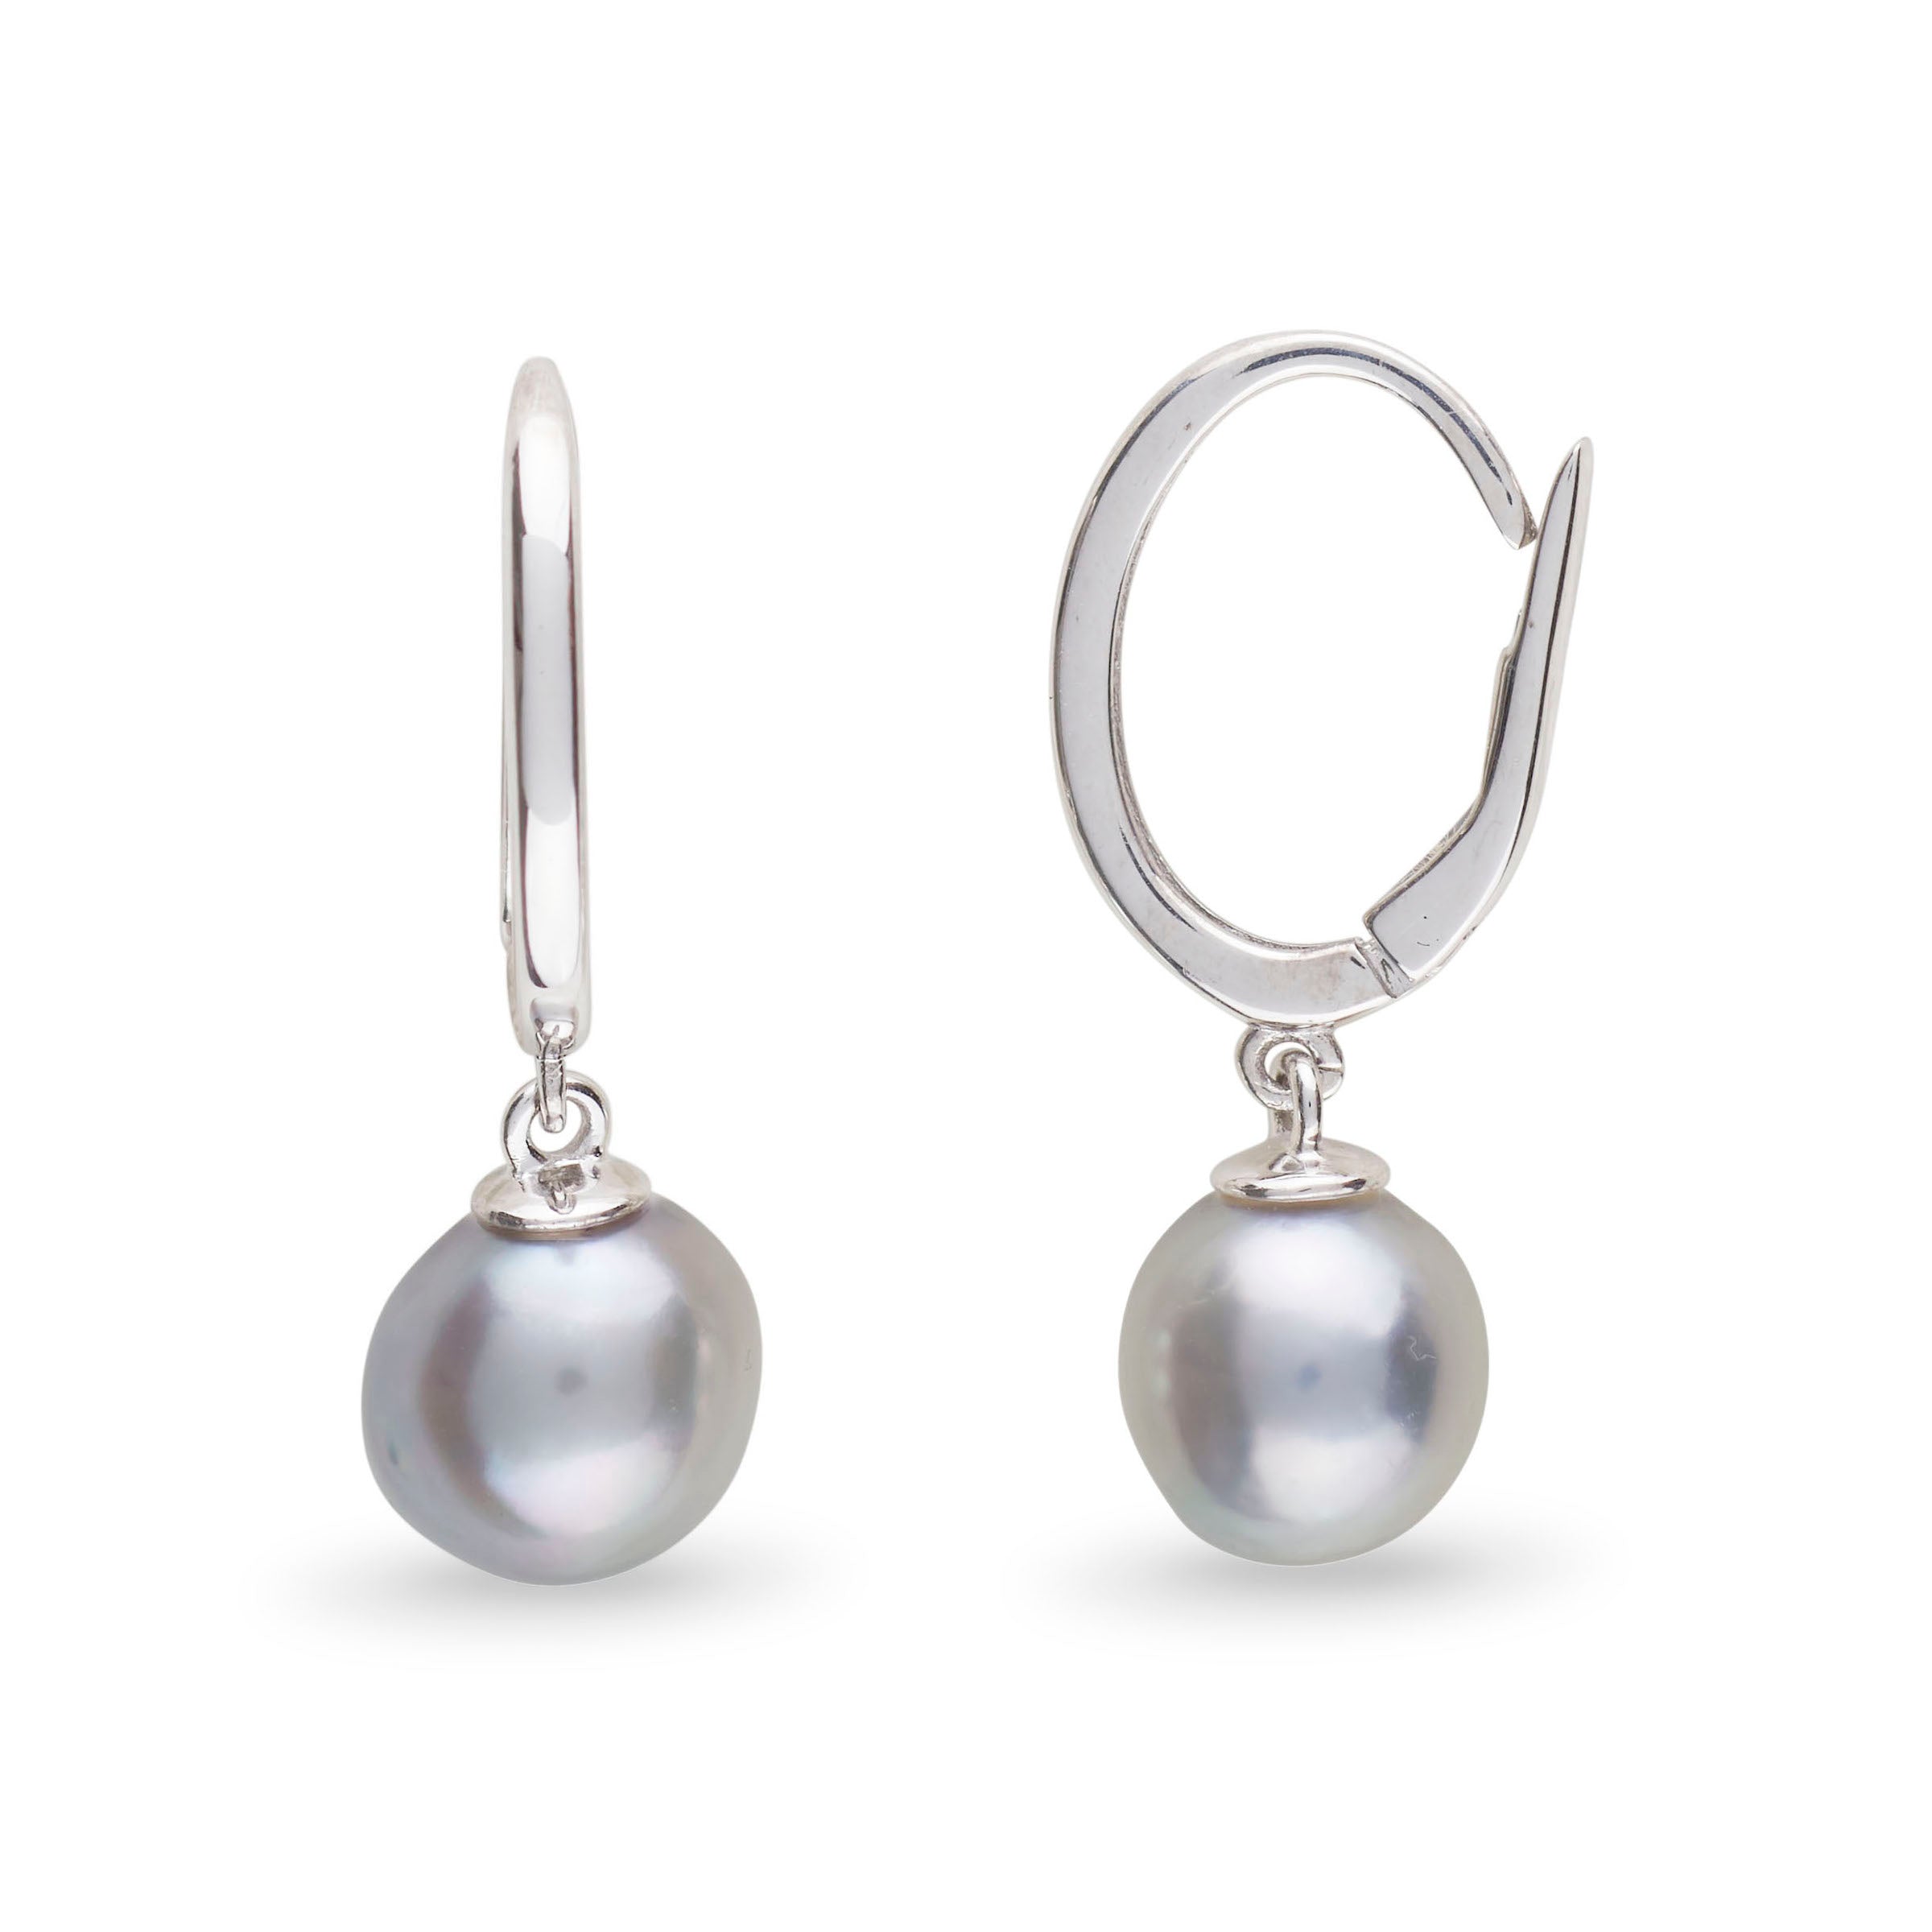 Solid Eternal Collection 8.0-9.0 mm Baroque Silver Akoya Pearl Dangle Earrings White gold